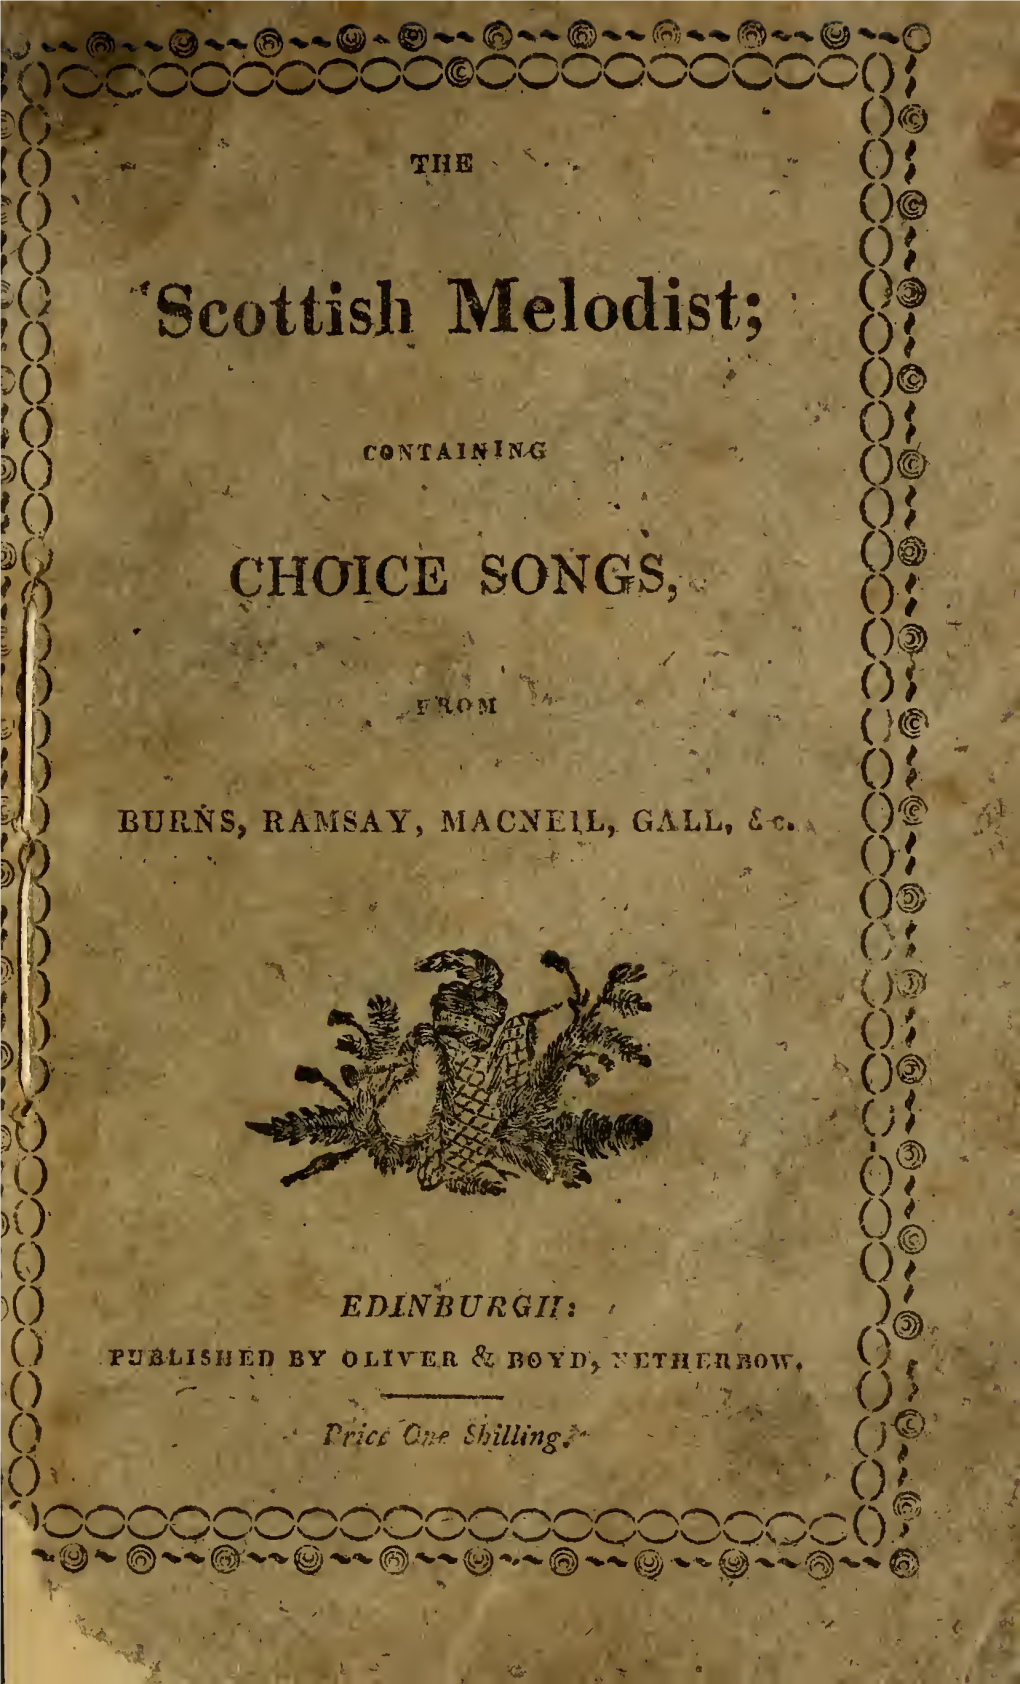 The Scottish Melodist, Containing Choice Songs, from Burns, Ramsay